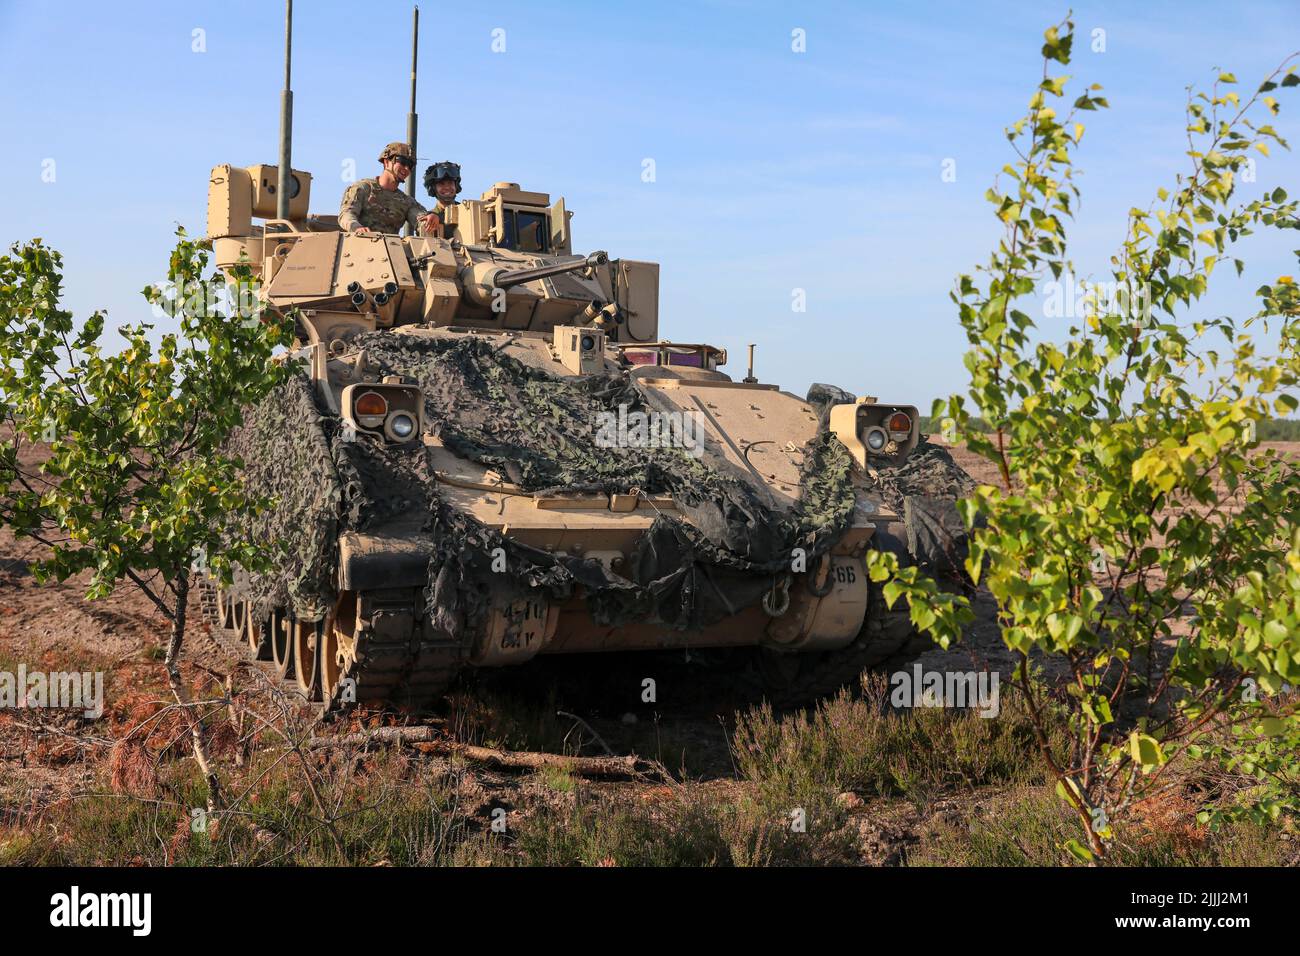 Finnish soldiers assigned to the Satakunta Jaeger Battalion, and U.S. Soldiers assigned to 3rd Armored Brigade Combat Team, 4th Infantry Division, train on the M2A3 Bradley Fighting Vehicle at Niinisalo, Finland, July 21, 2022. The 3/4th ABCT is among other units assigned to the 1st Infantry Division, proudly working alongside NATO allies and regional security partners to provide combat-credible forces to V Corps, America's forward deployed corps in Europe. (U.S. Army photo by Sgt. Andrew Greenwood) Stock Photo